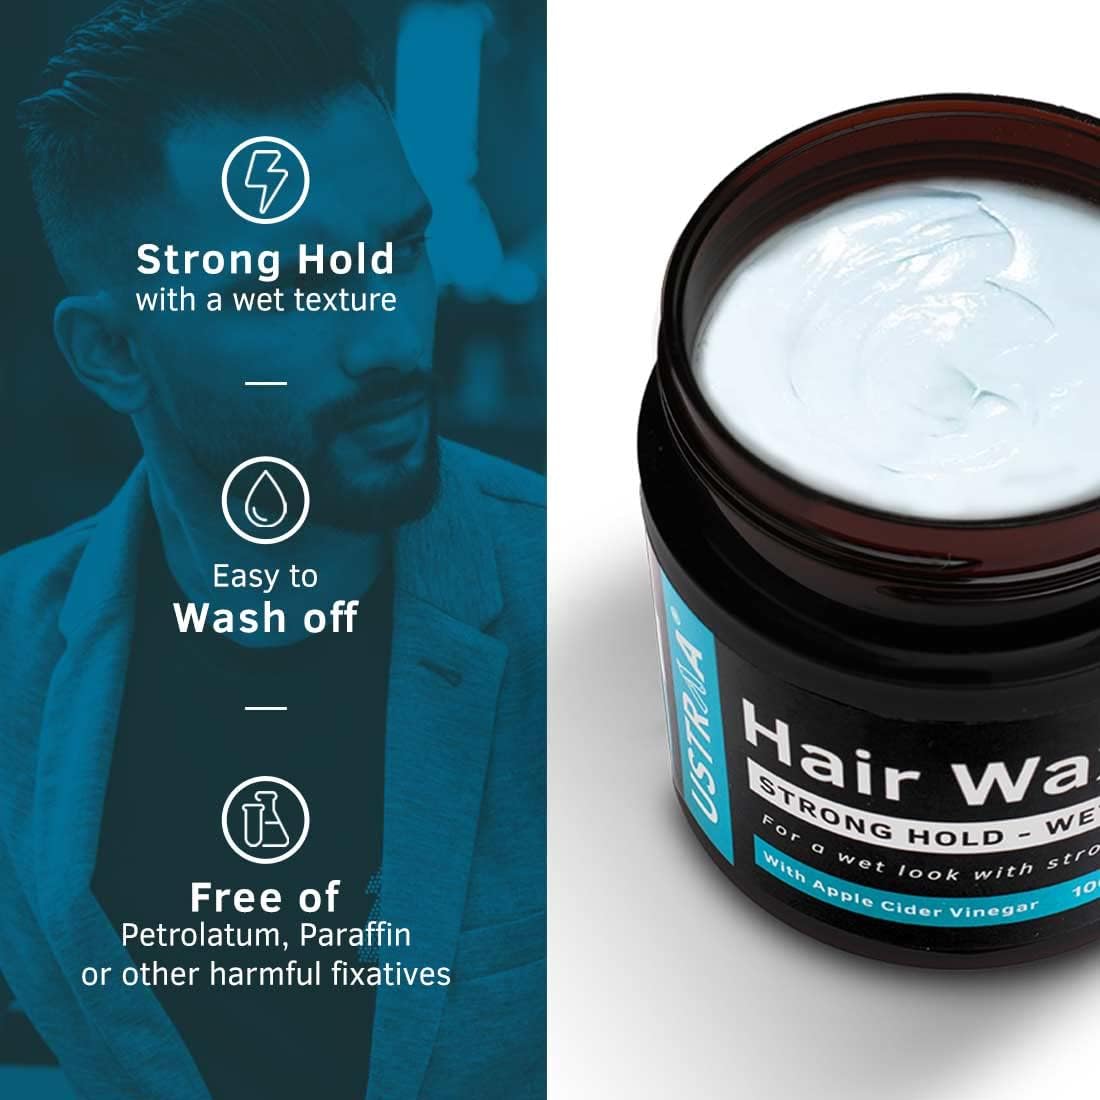 USTRAA Hair Wax Strong Hold - Wet Look with Apple Cider Vinegar 100g